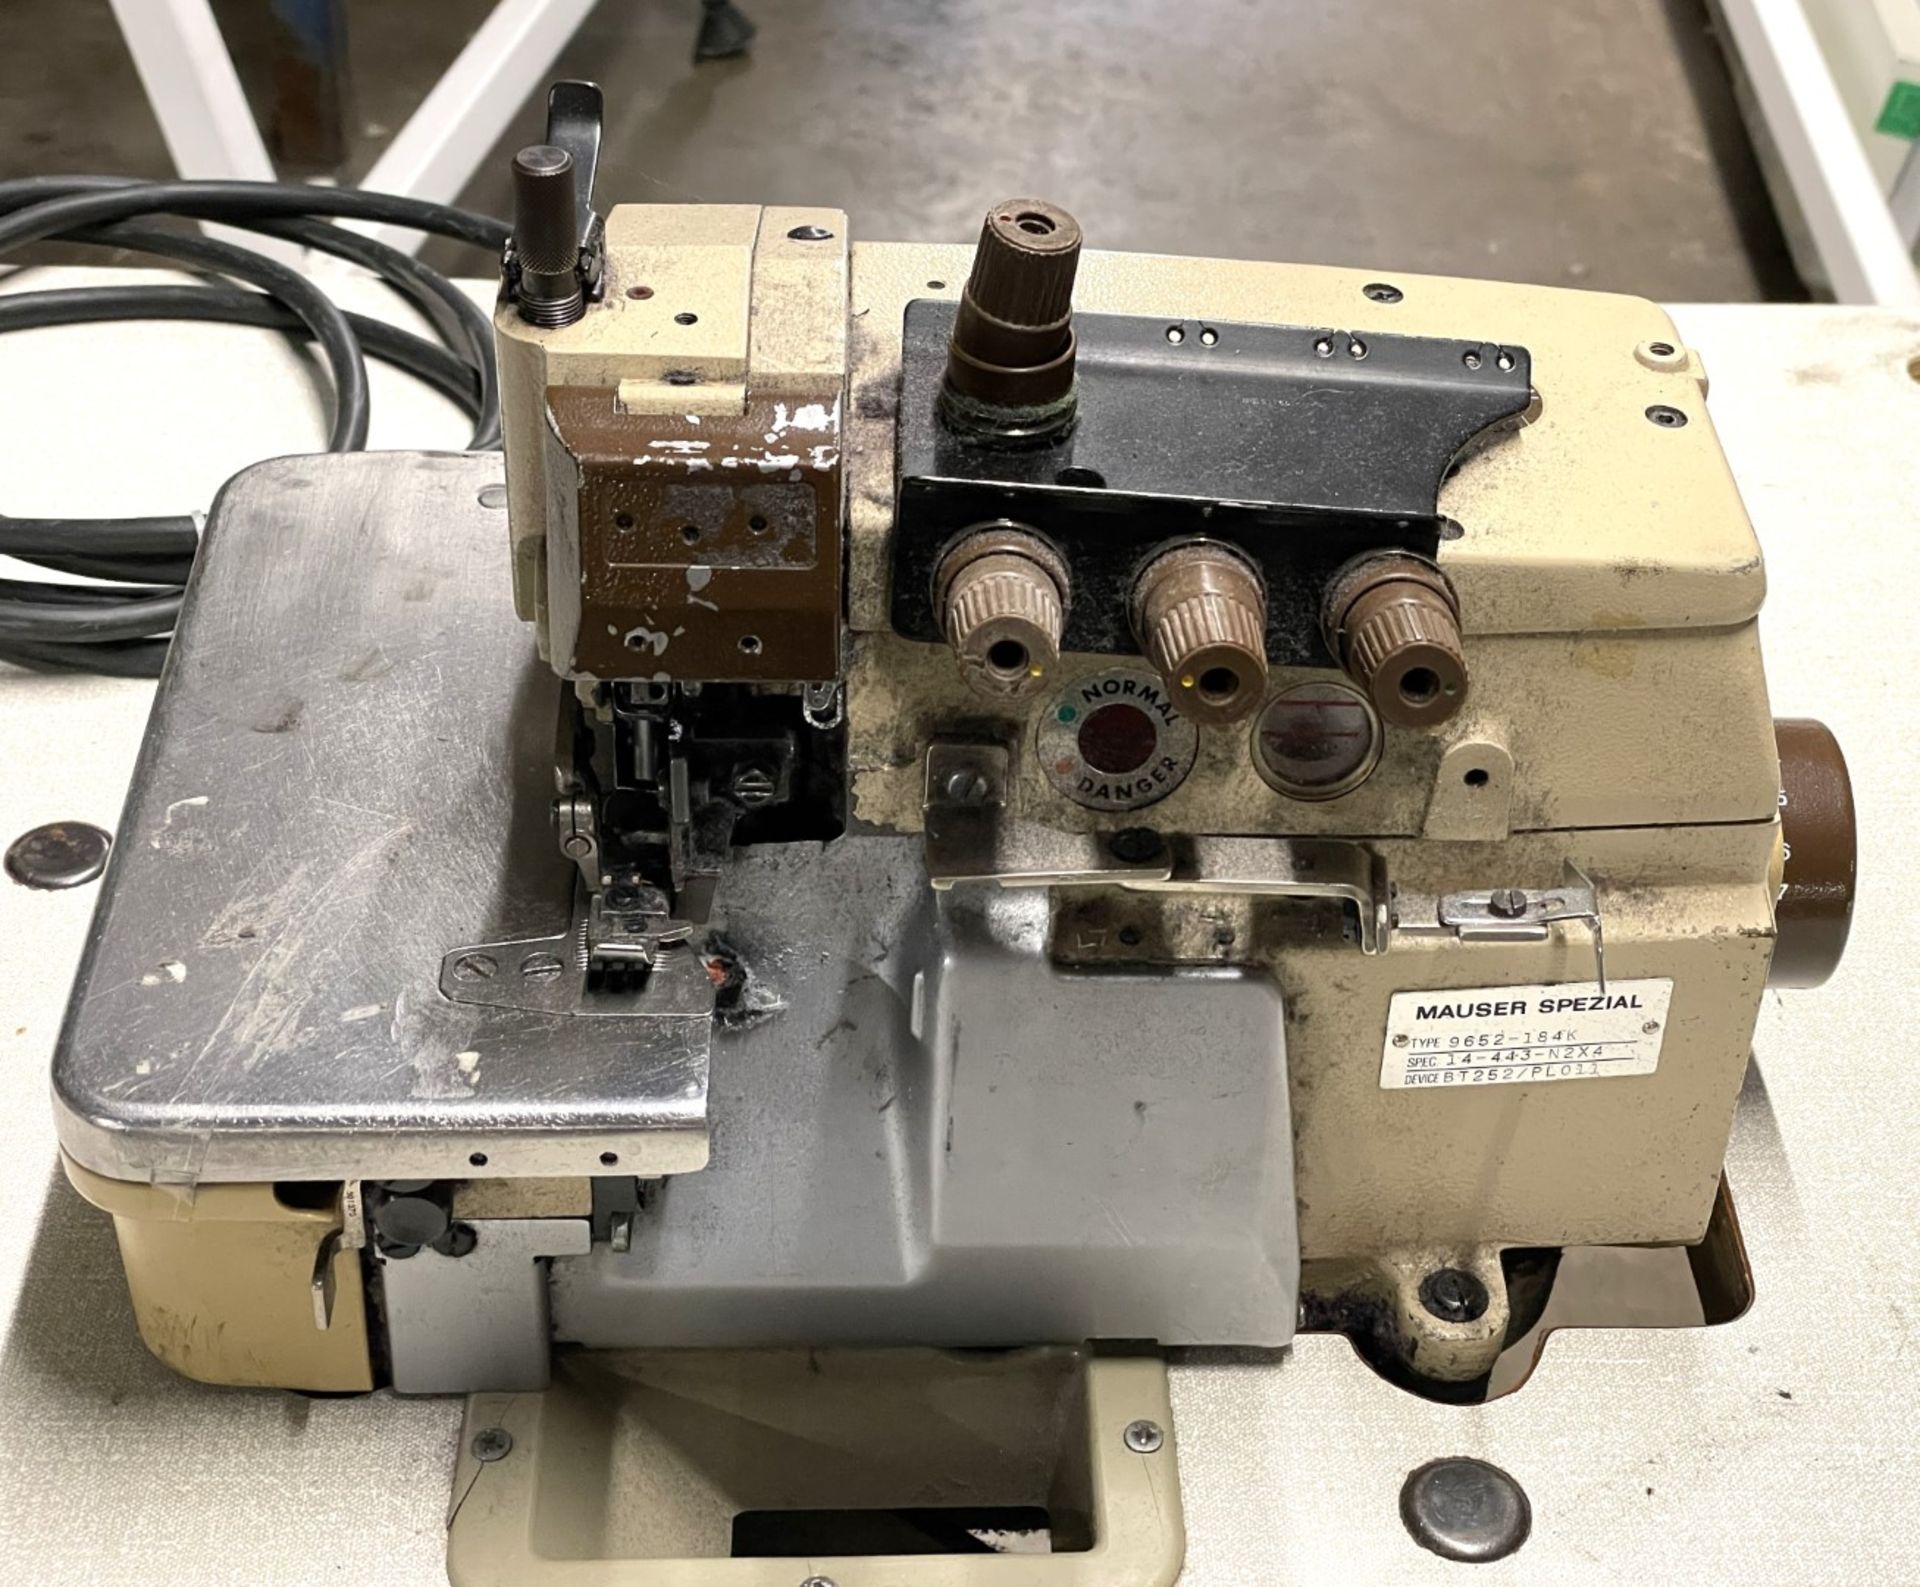 1 x Mauser Spezial 9652-184K Industrial Overlock Sewing Machine With Table - Image 3 of 11